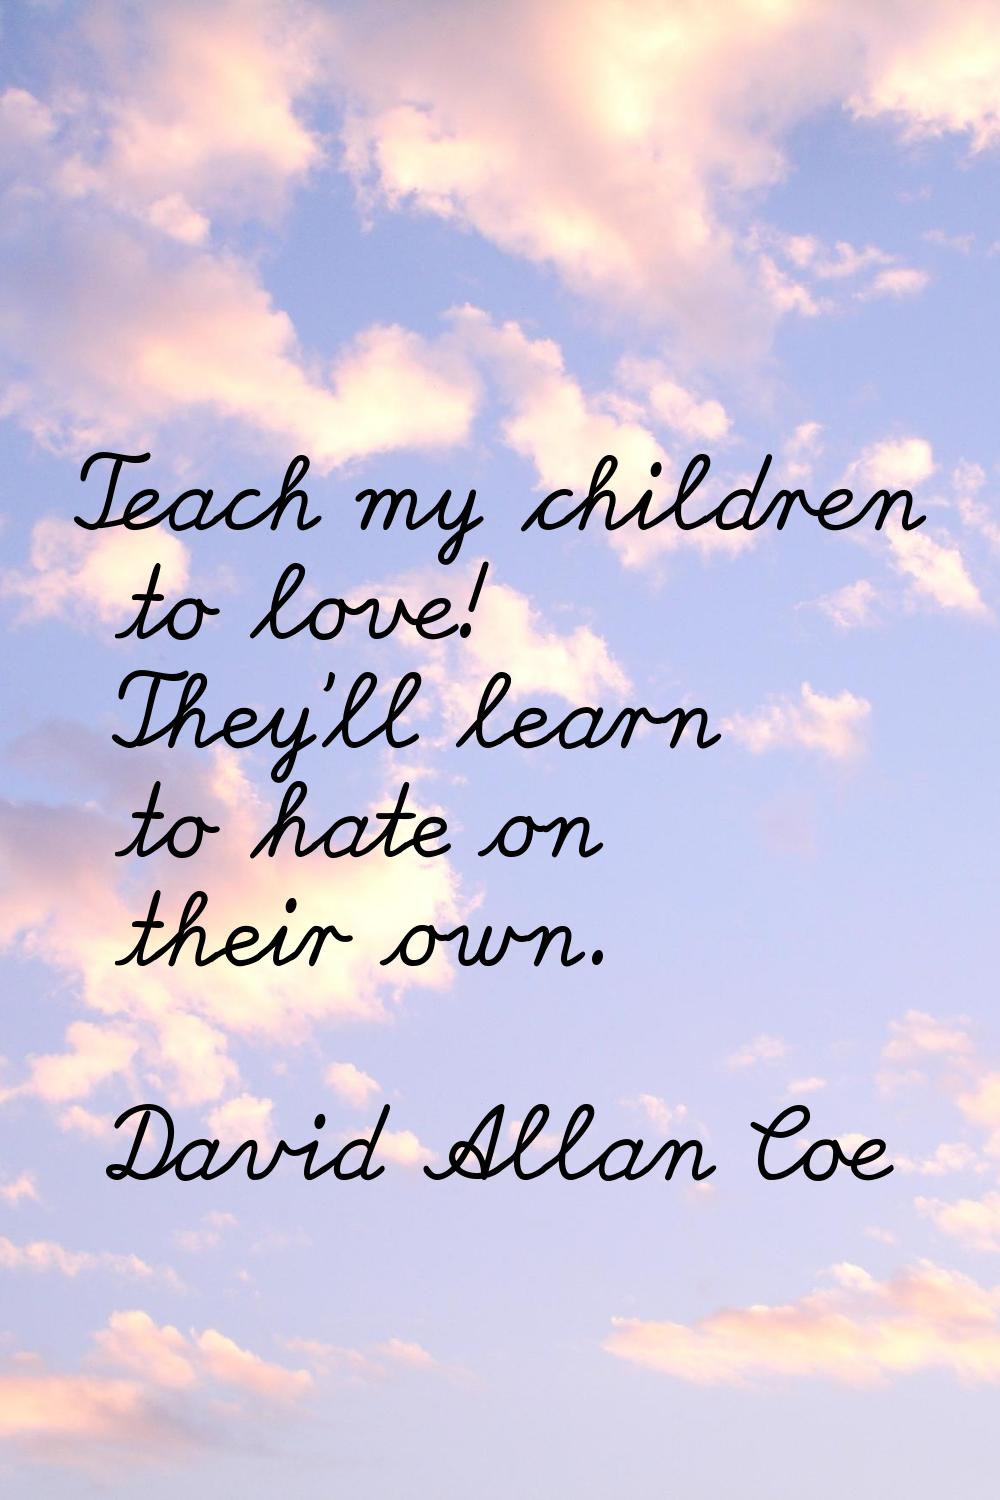 Teach my children to love! They'll learn to hate on their own.